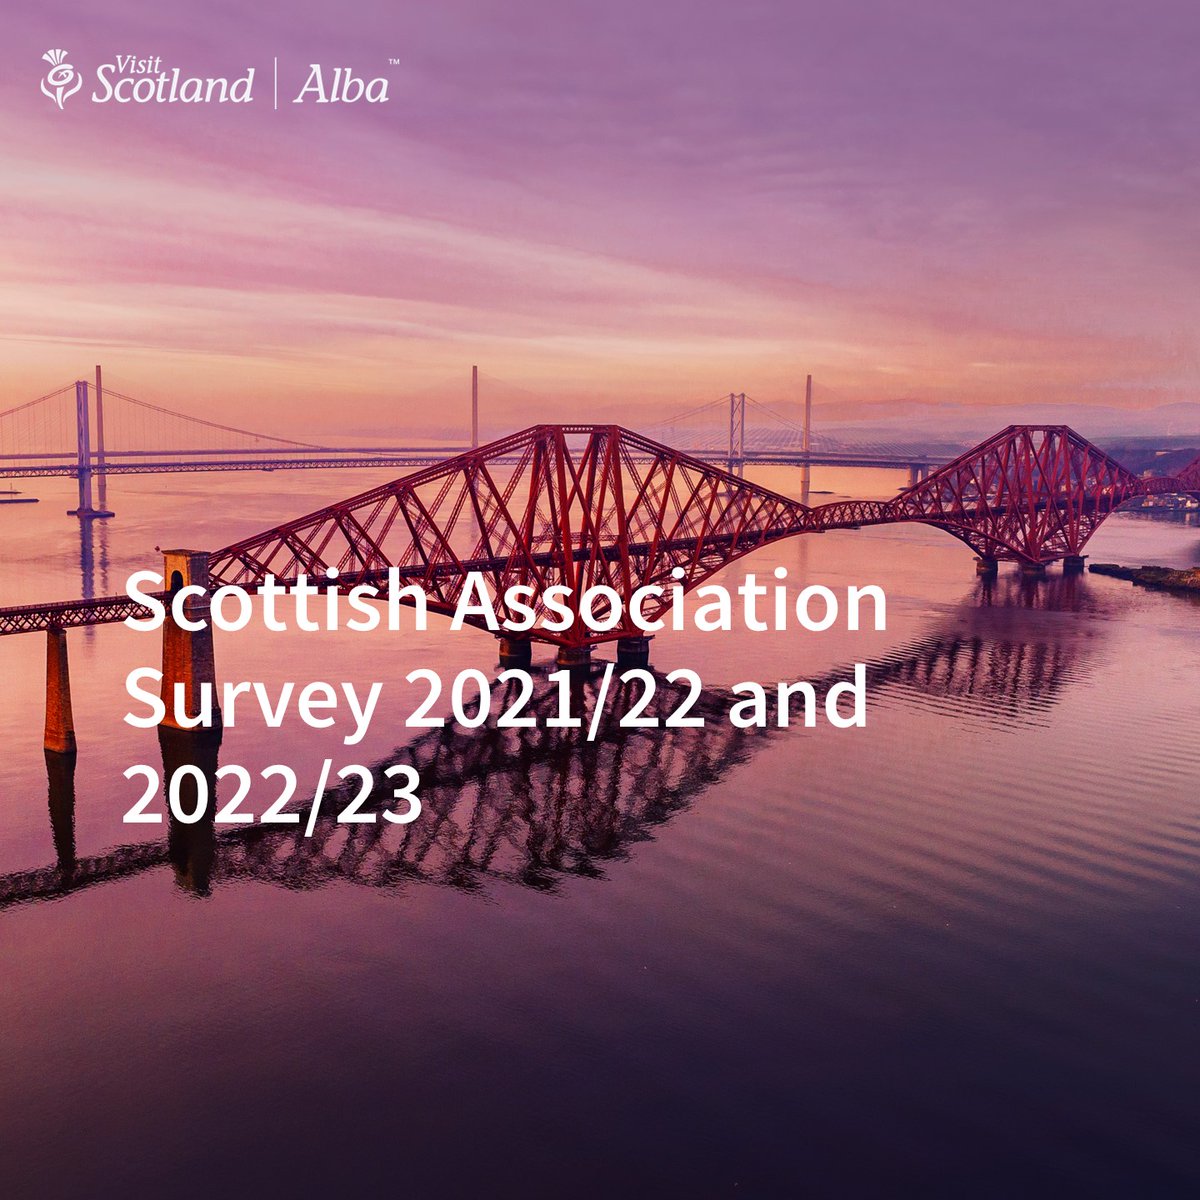 The latest instalments of the Scottish Association Survey are now available for all to read. The 2021/22 & 2022/23 surveys highlight the value of the association sector and its incredible benefits to Scotland. Read more 👉linkedin.com/pulse/visitsco… #BusinessEvents #Scotland